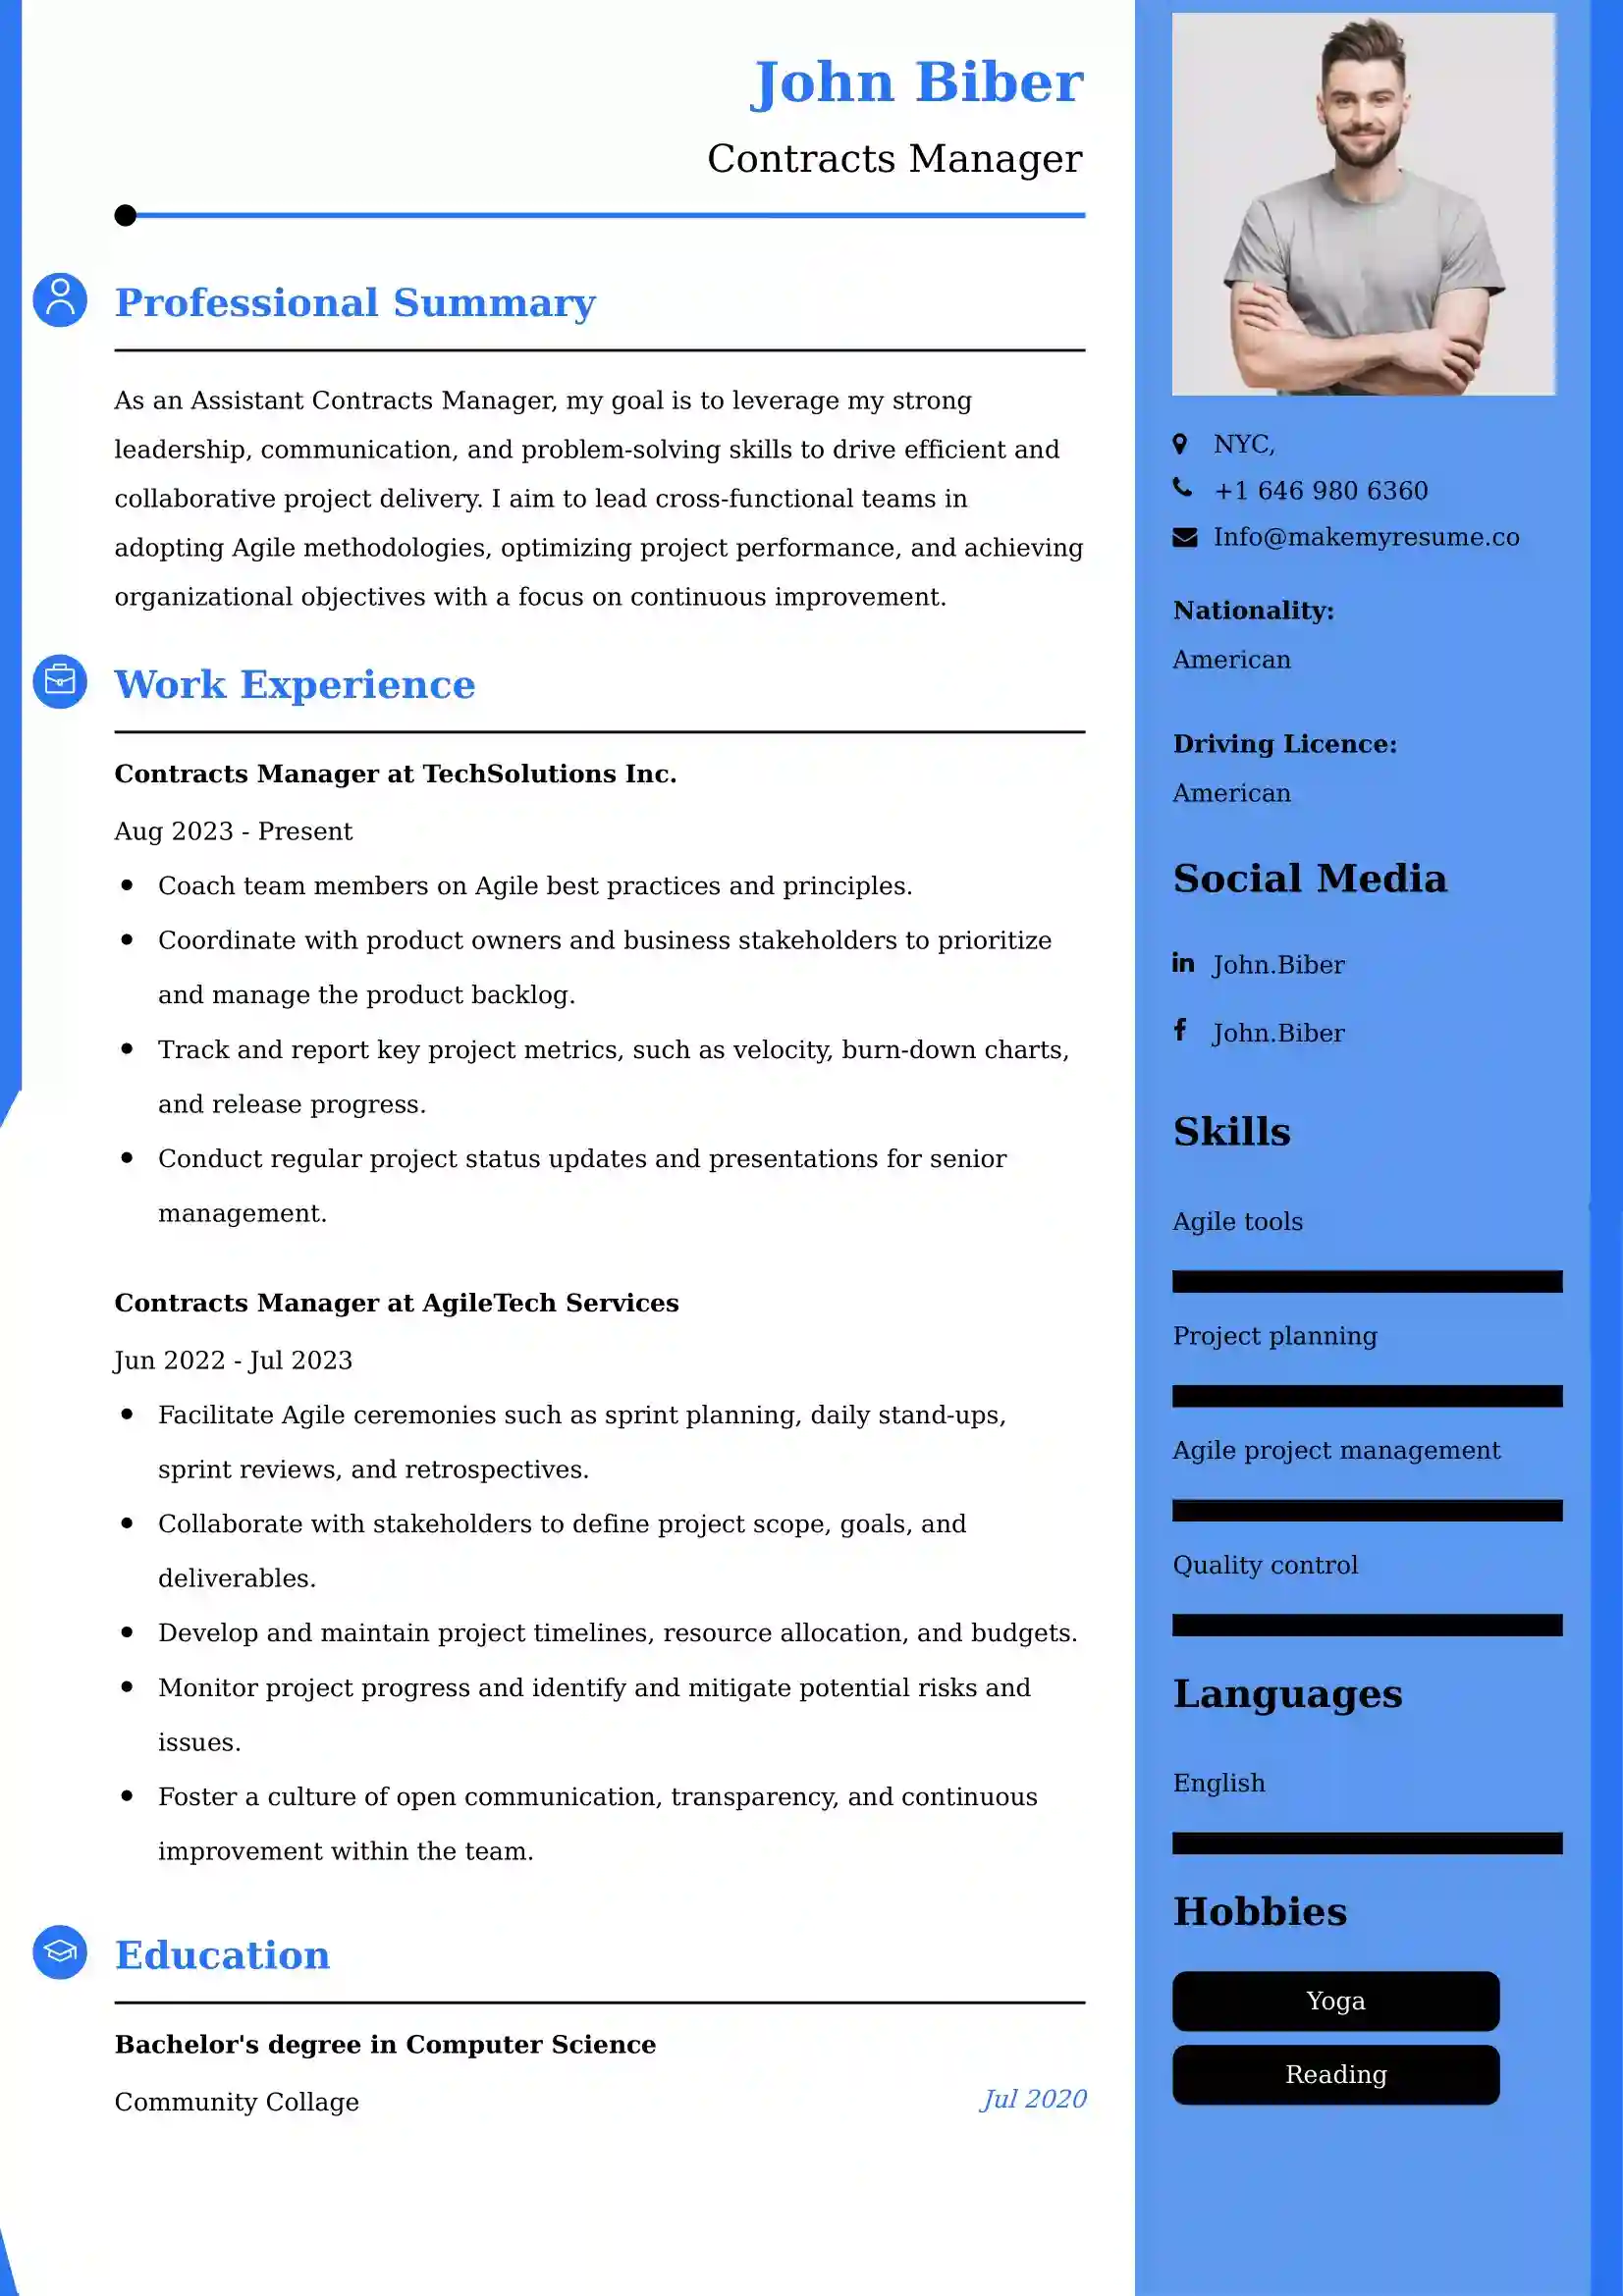 Contracts Manager Resume Examples - UK Format, Latest Template.